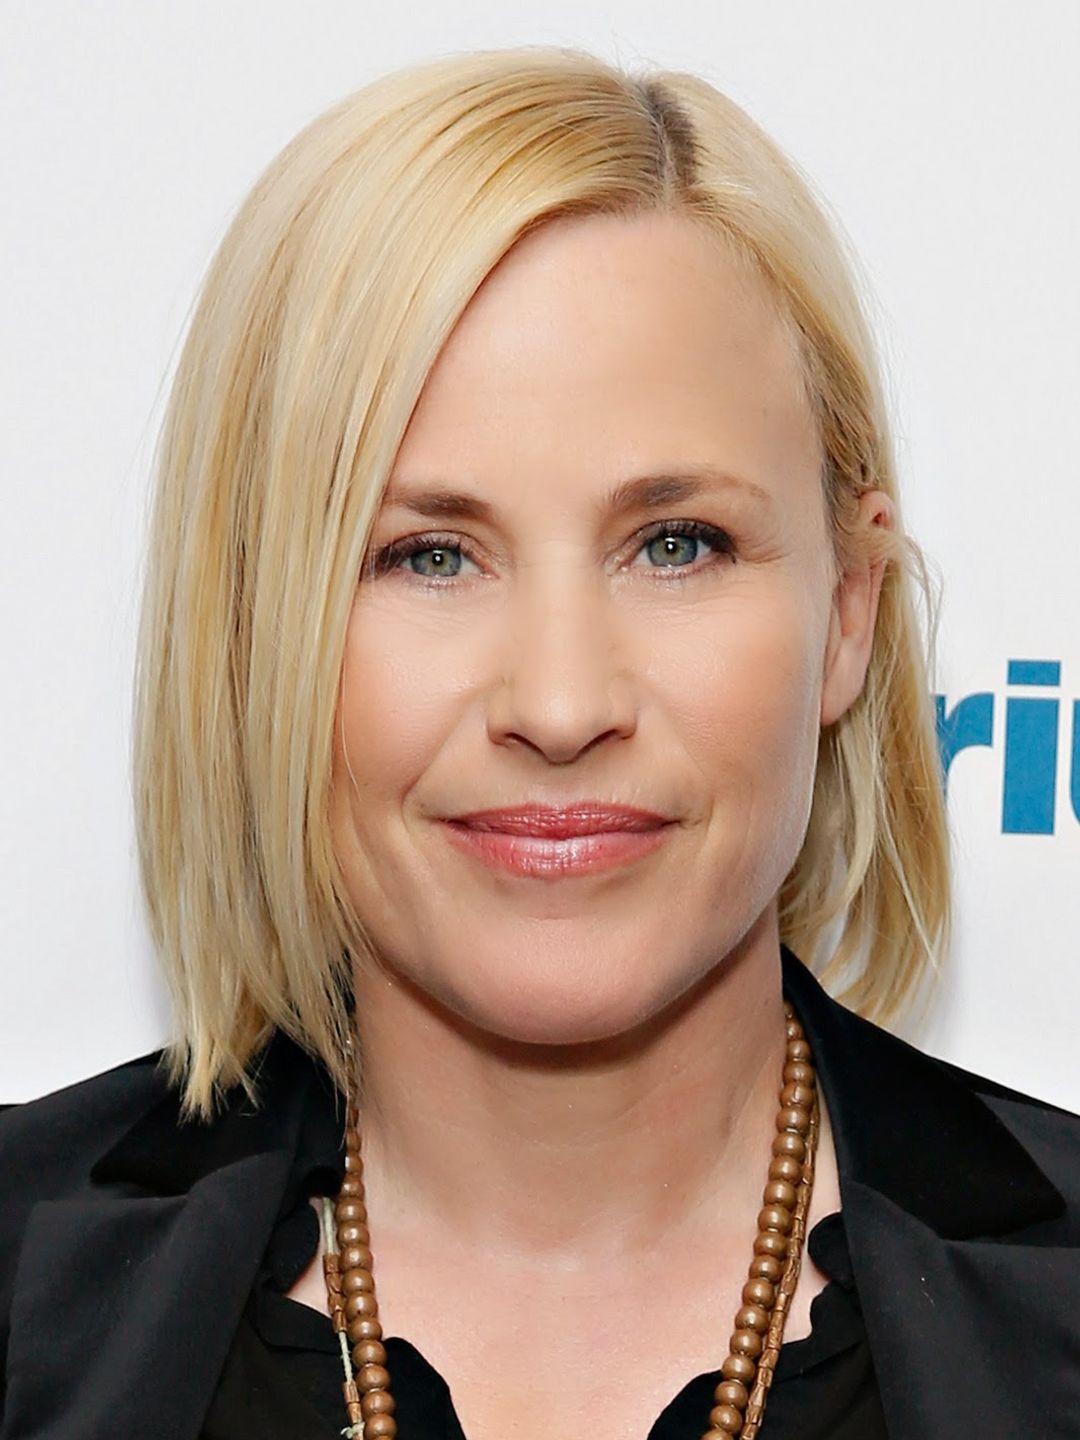 Patricia Arquette how did she became famous